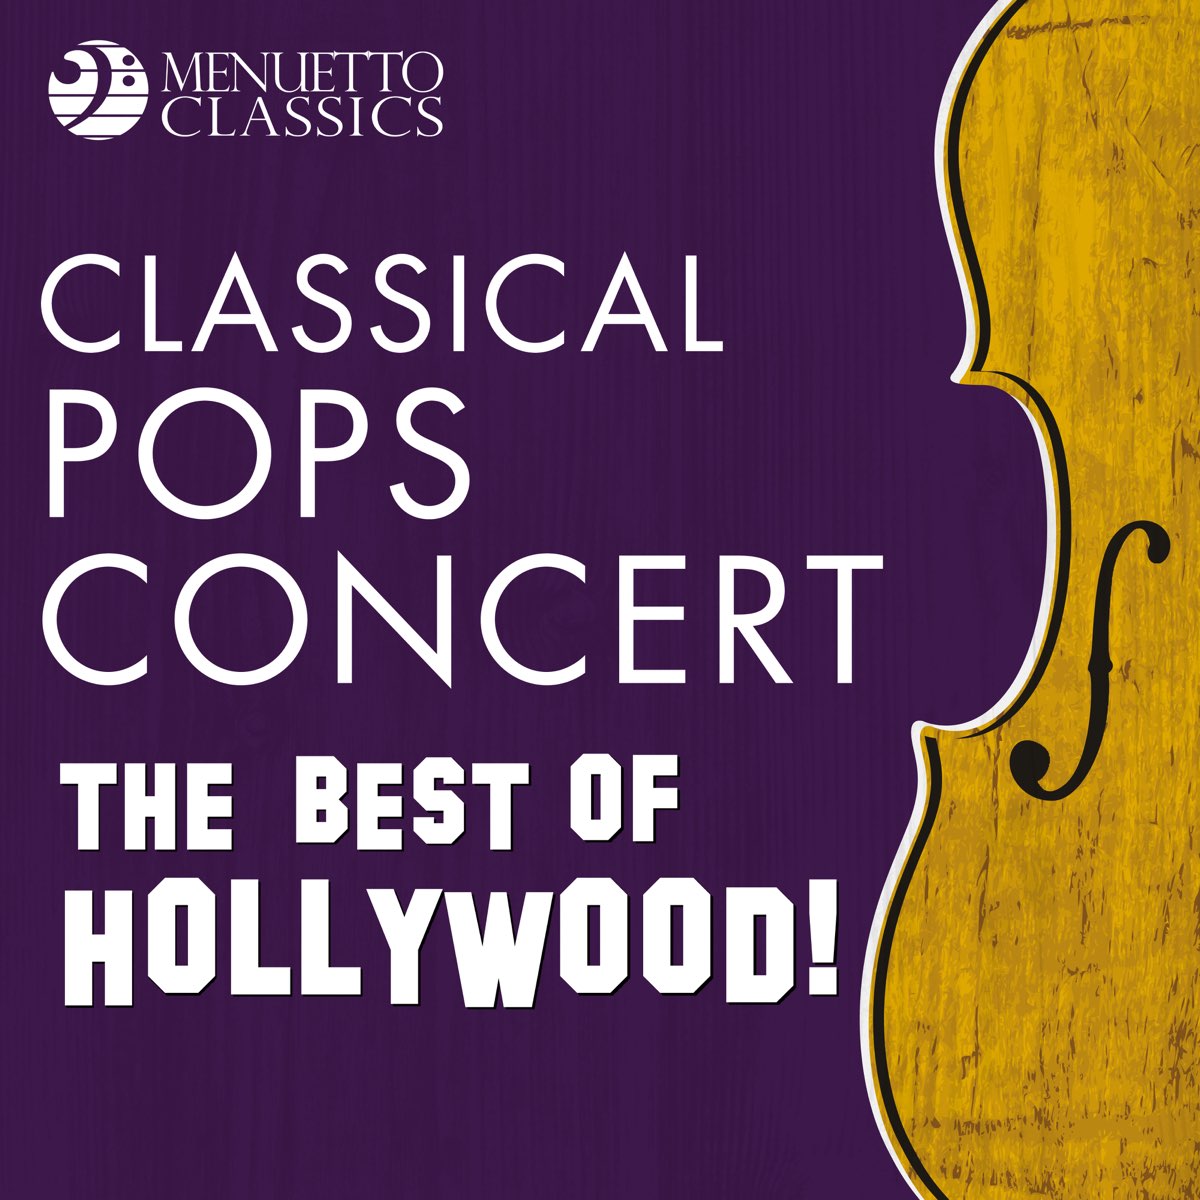 ‎Classical Pops Concert The Best of Hollywood! by Various Artists on